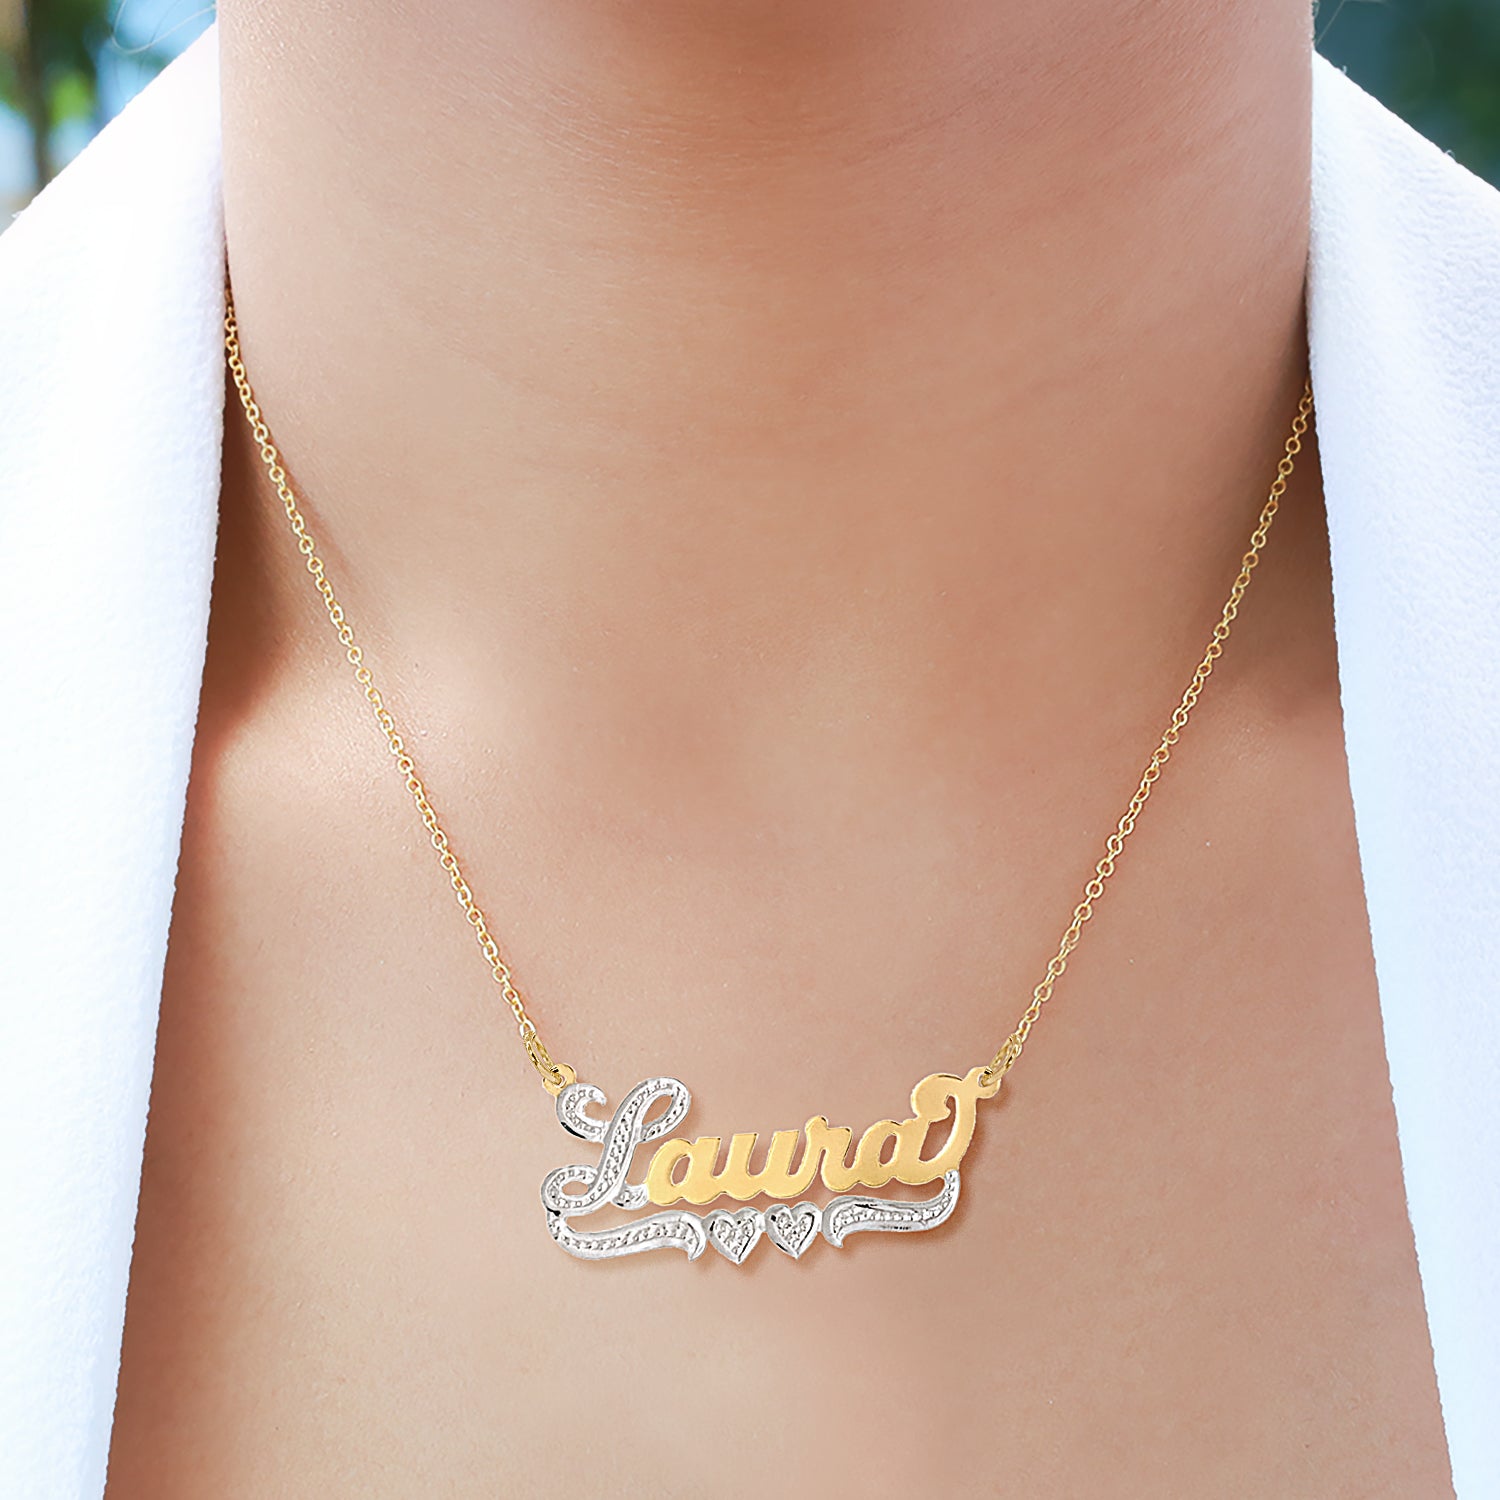 Laura Nameplate Necklace with Heart and Tail – Jay Aimee Designs